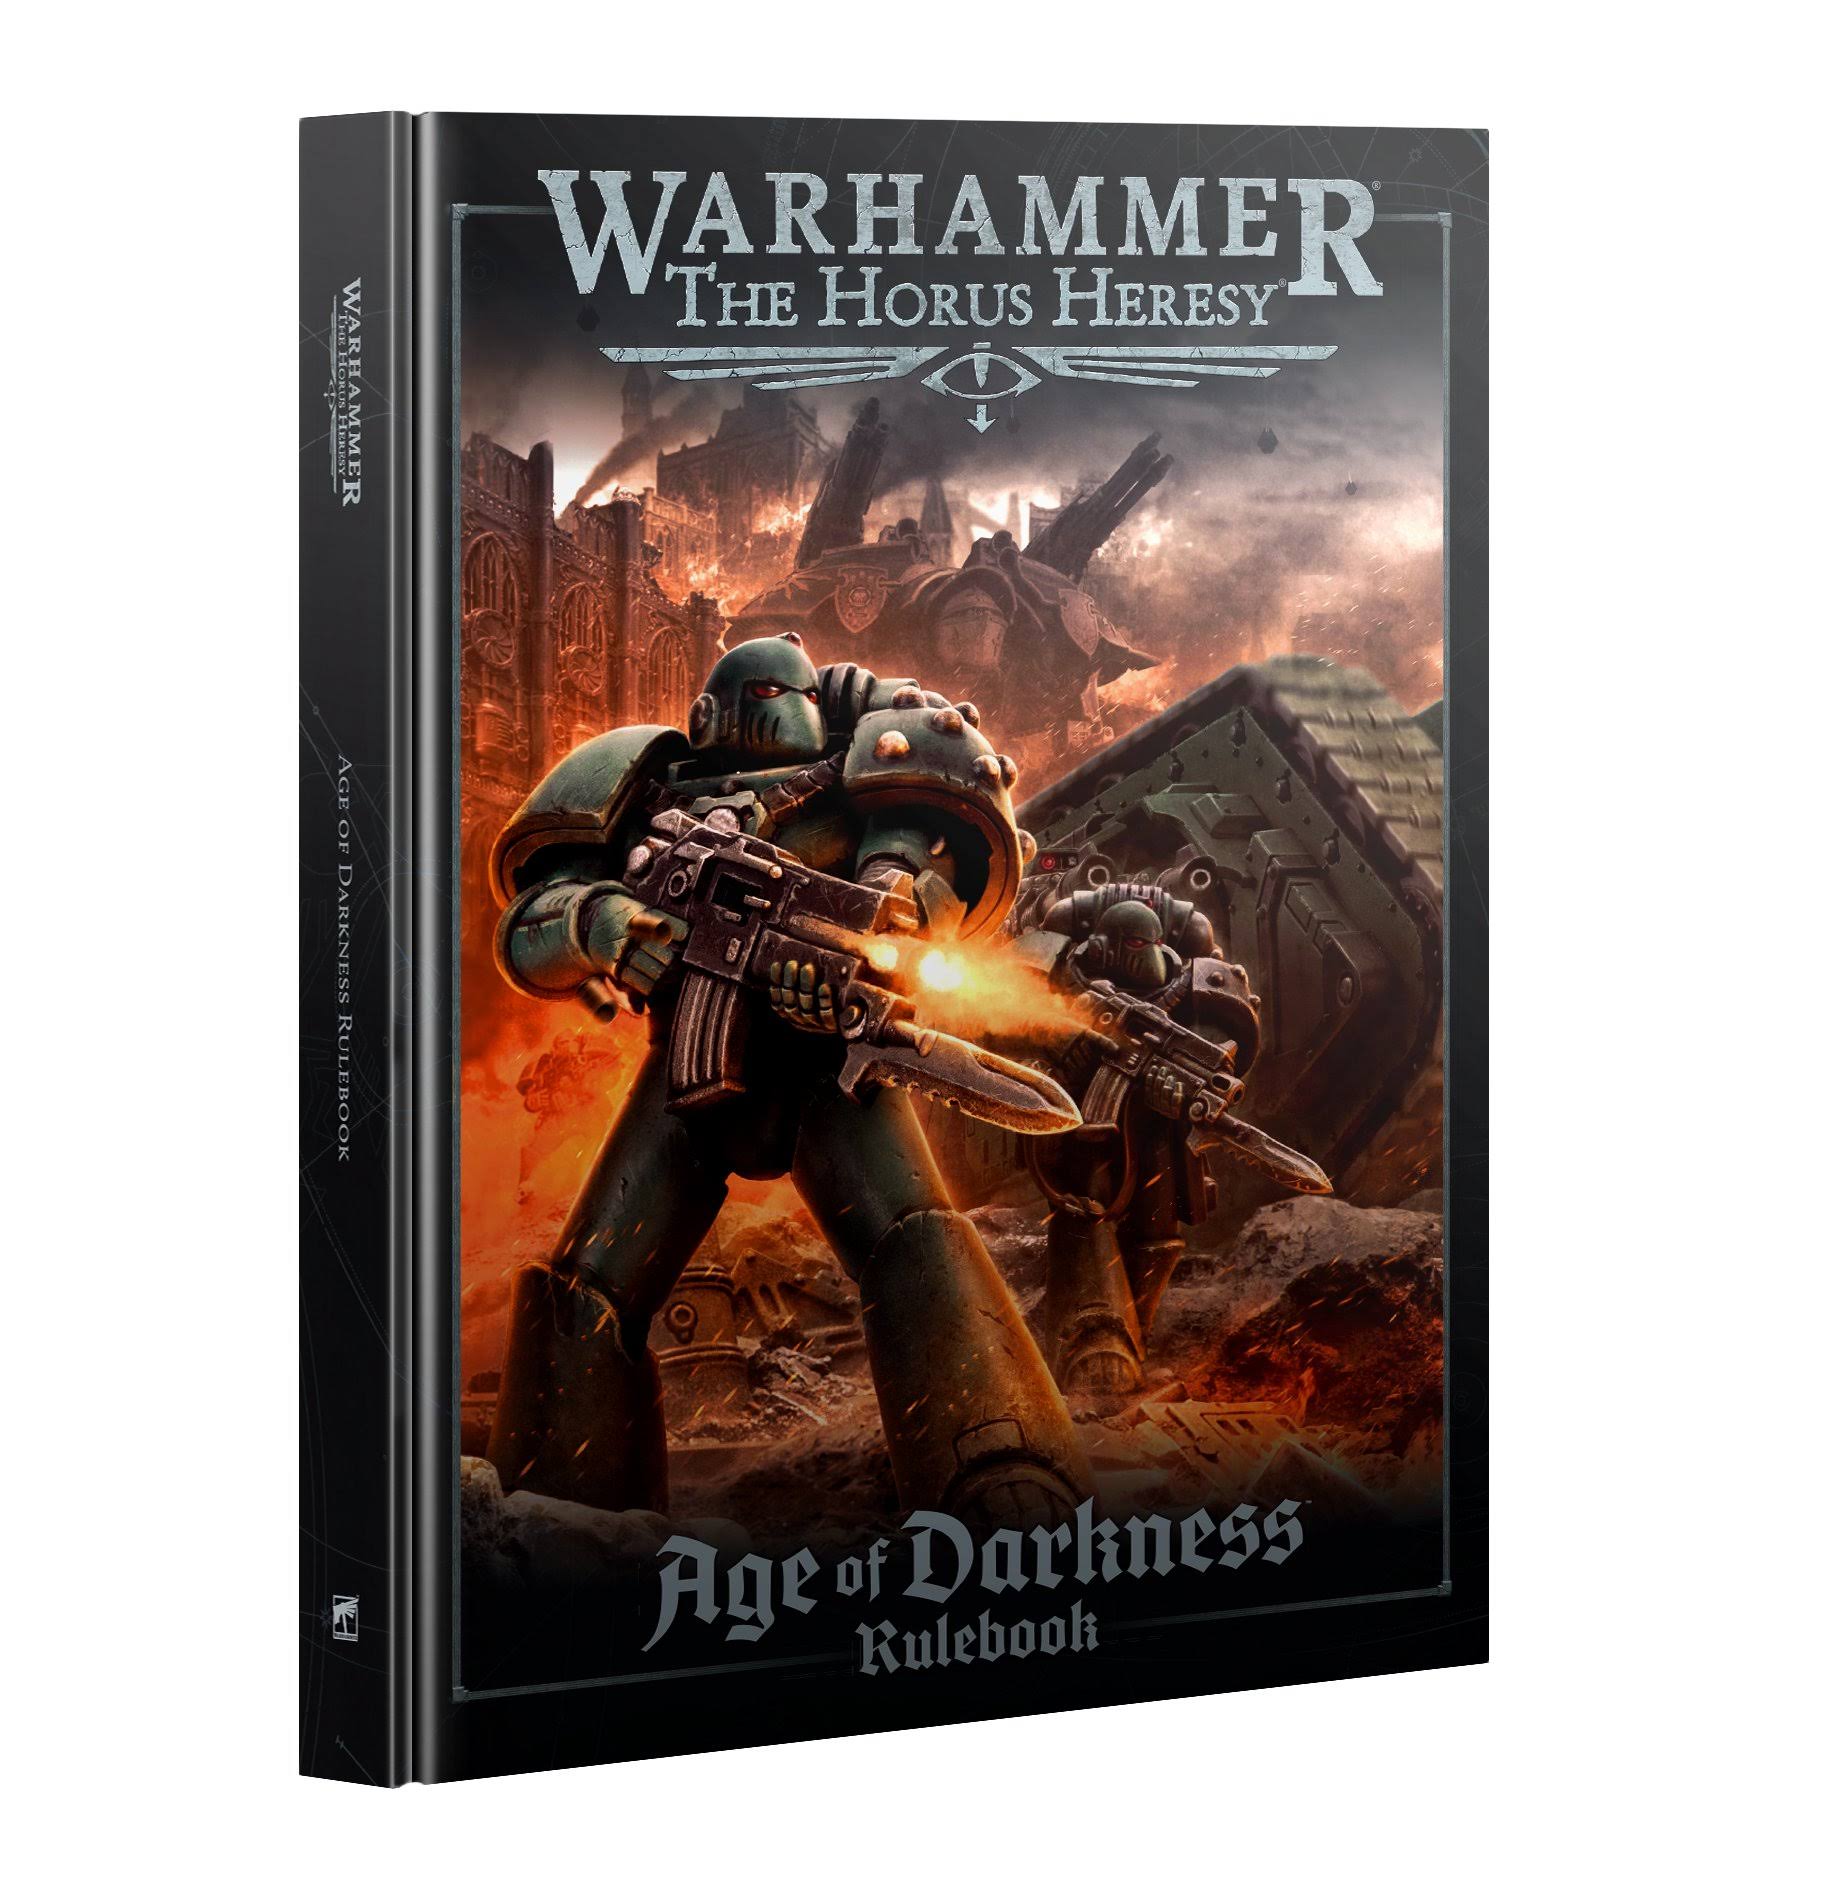 The Horus Heresy – Age of Darkness Rulebook